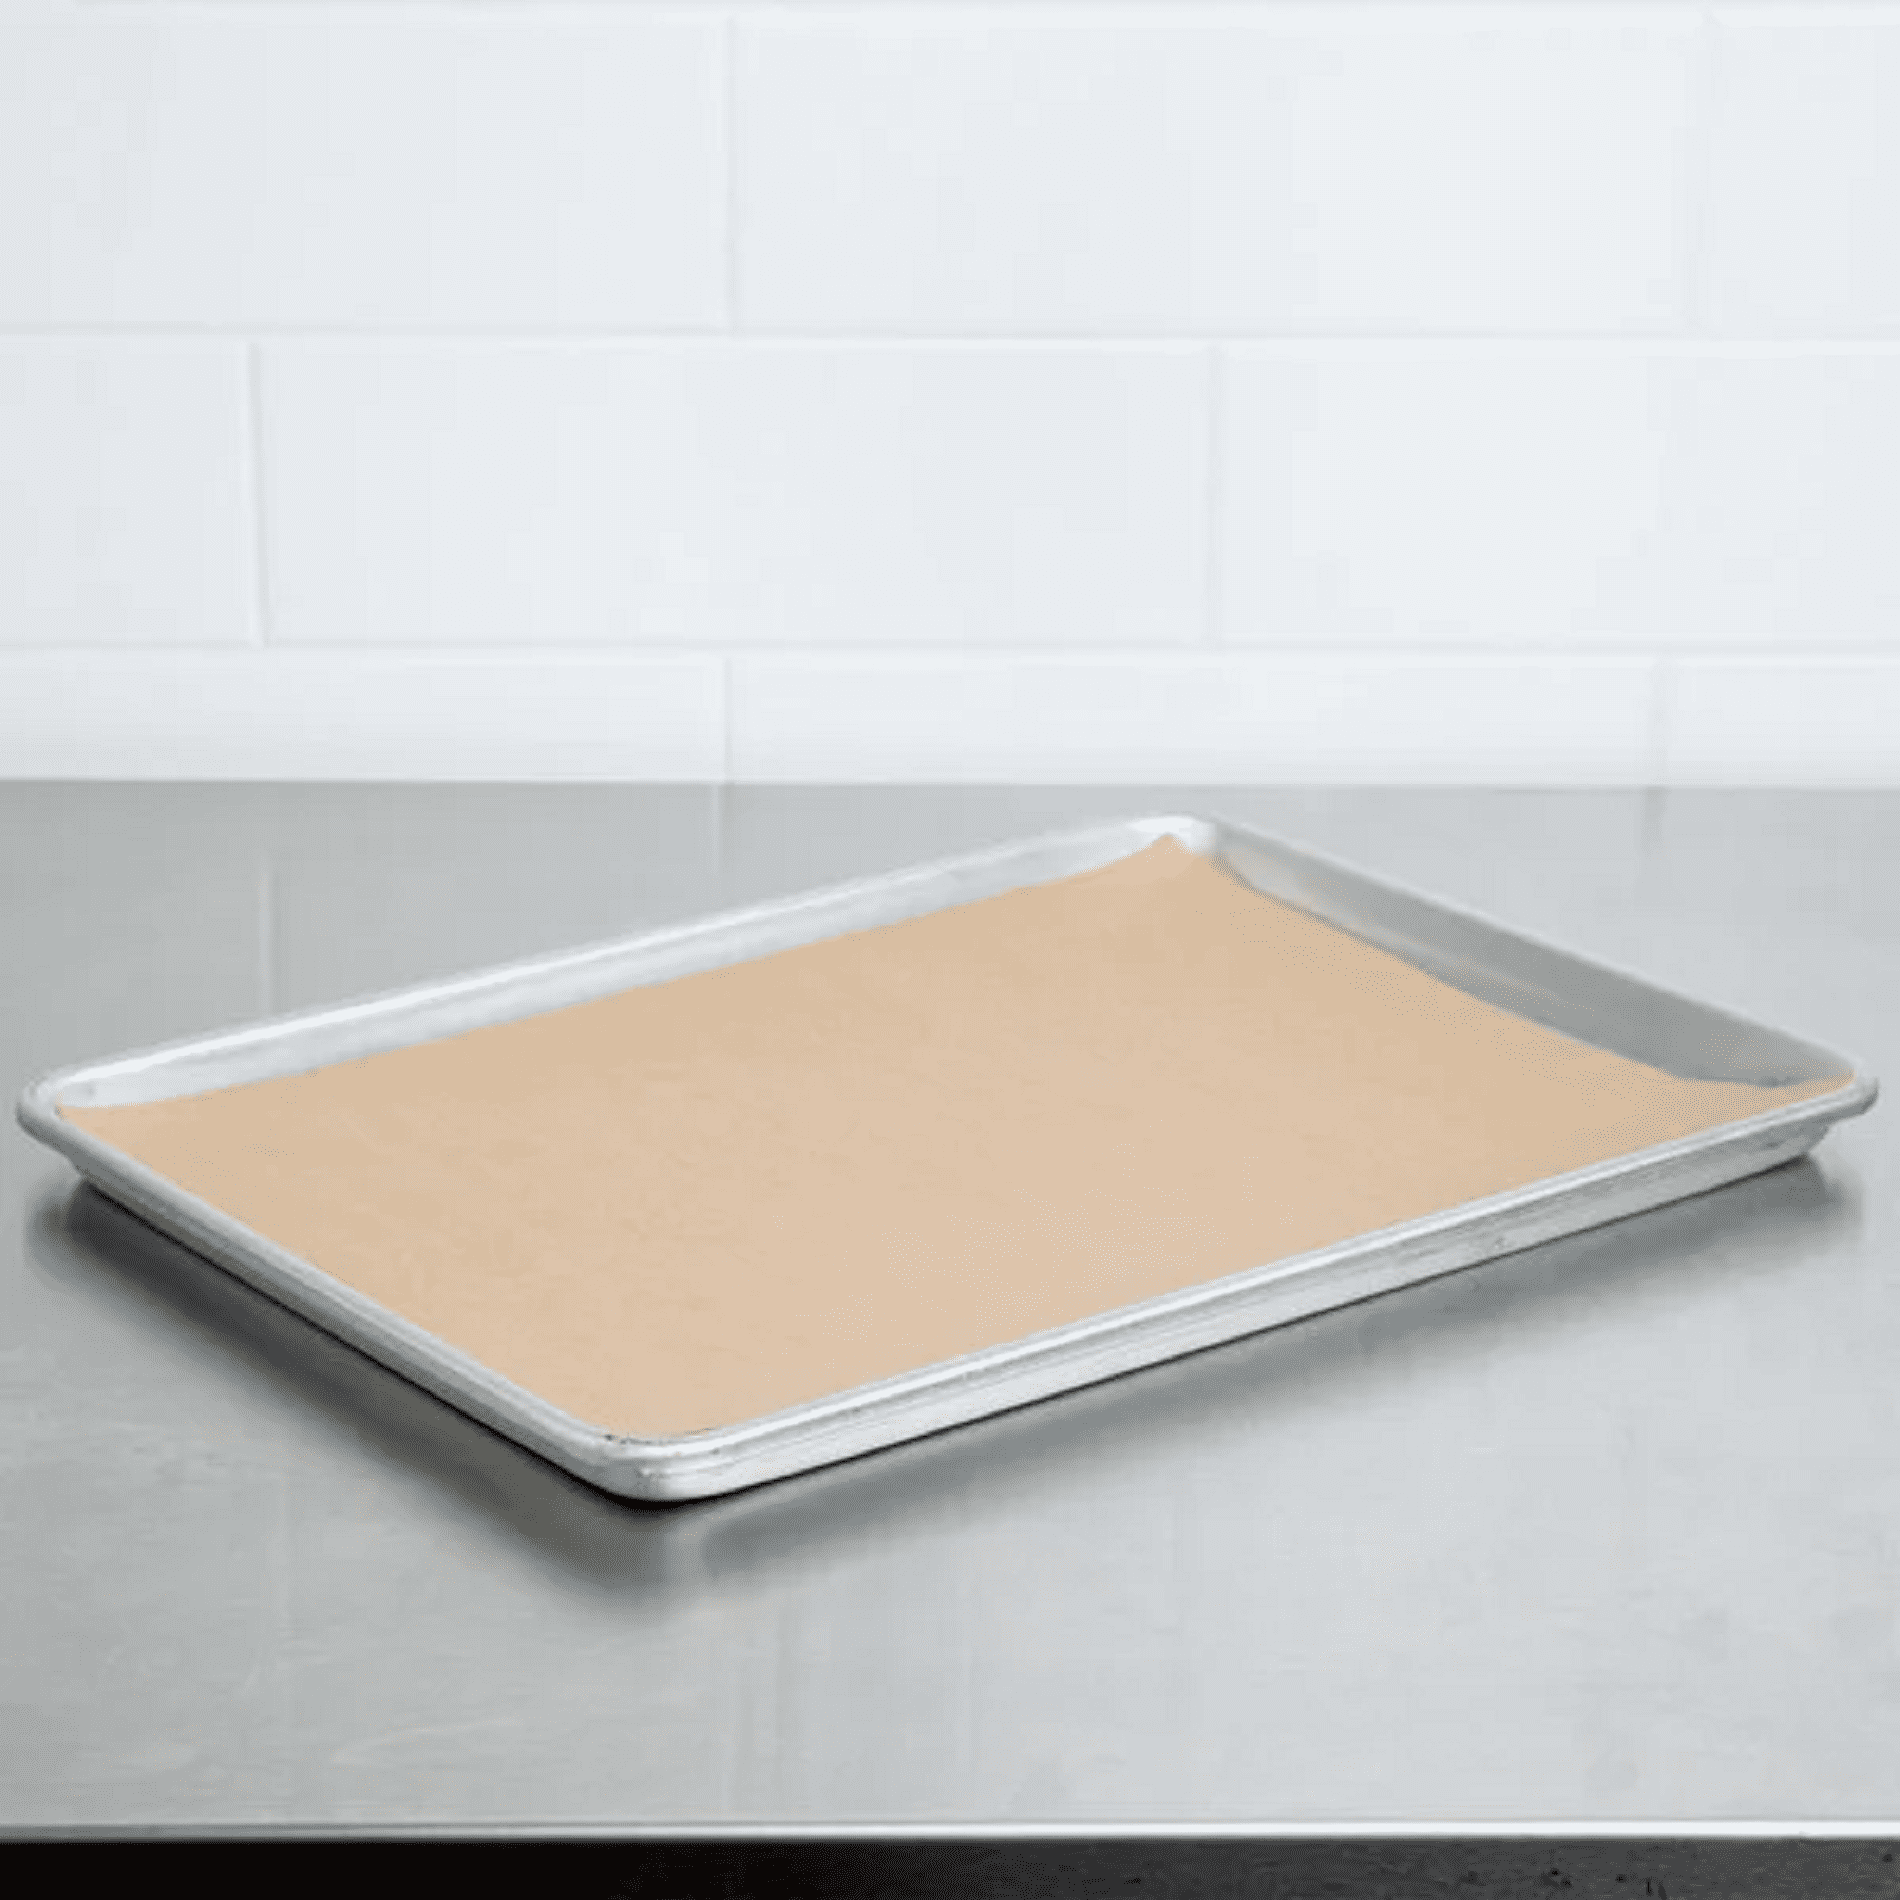 Chefworth Bleached Quilon Treated White Parchment Paper Baking Sheets Pan Liner 8x12 100 Sheets for 1/4 Pan, Size: 8 x 12